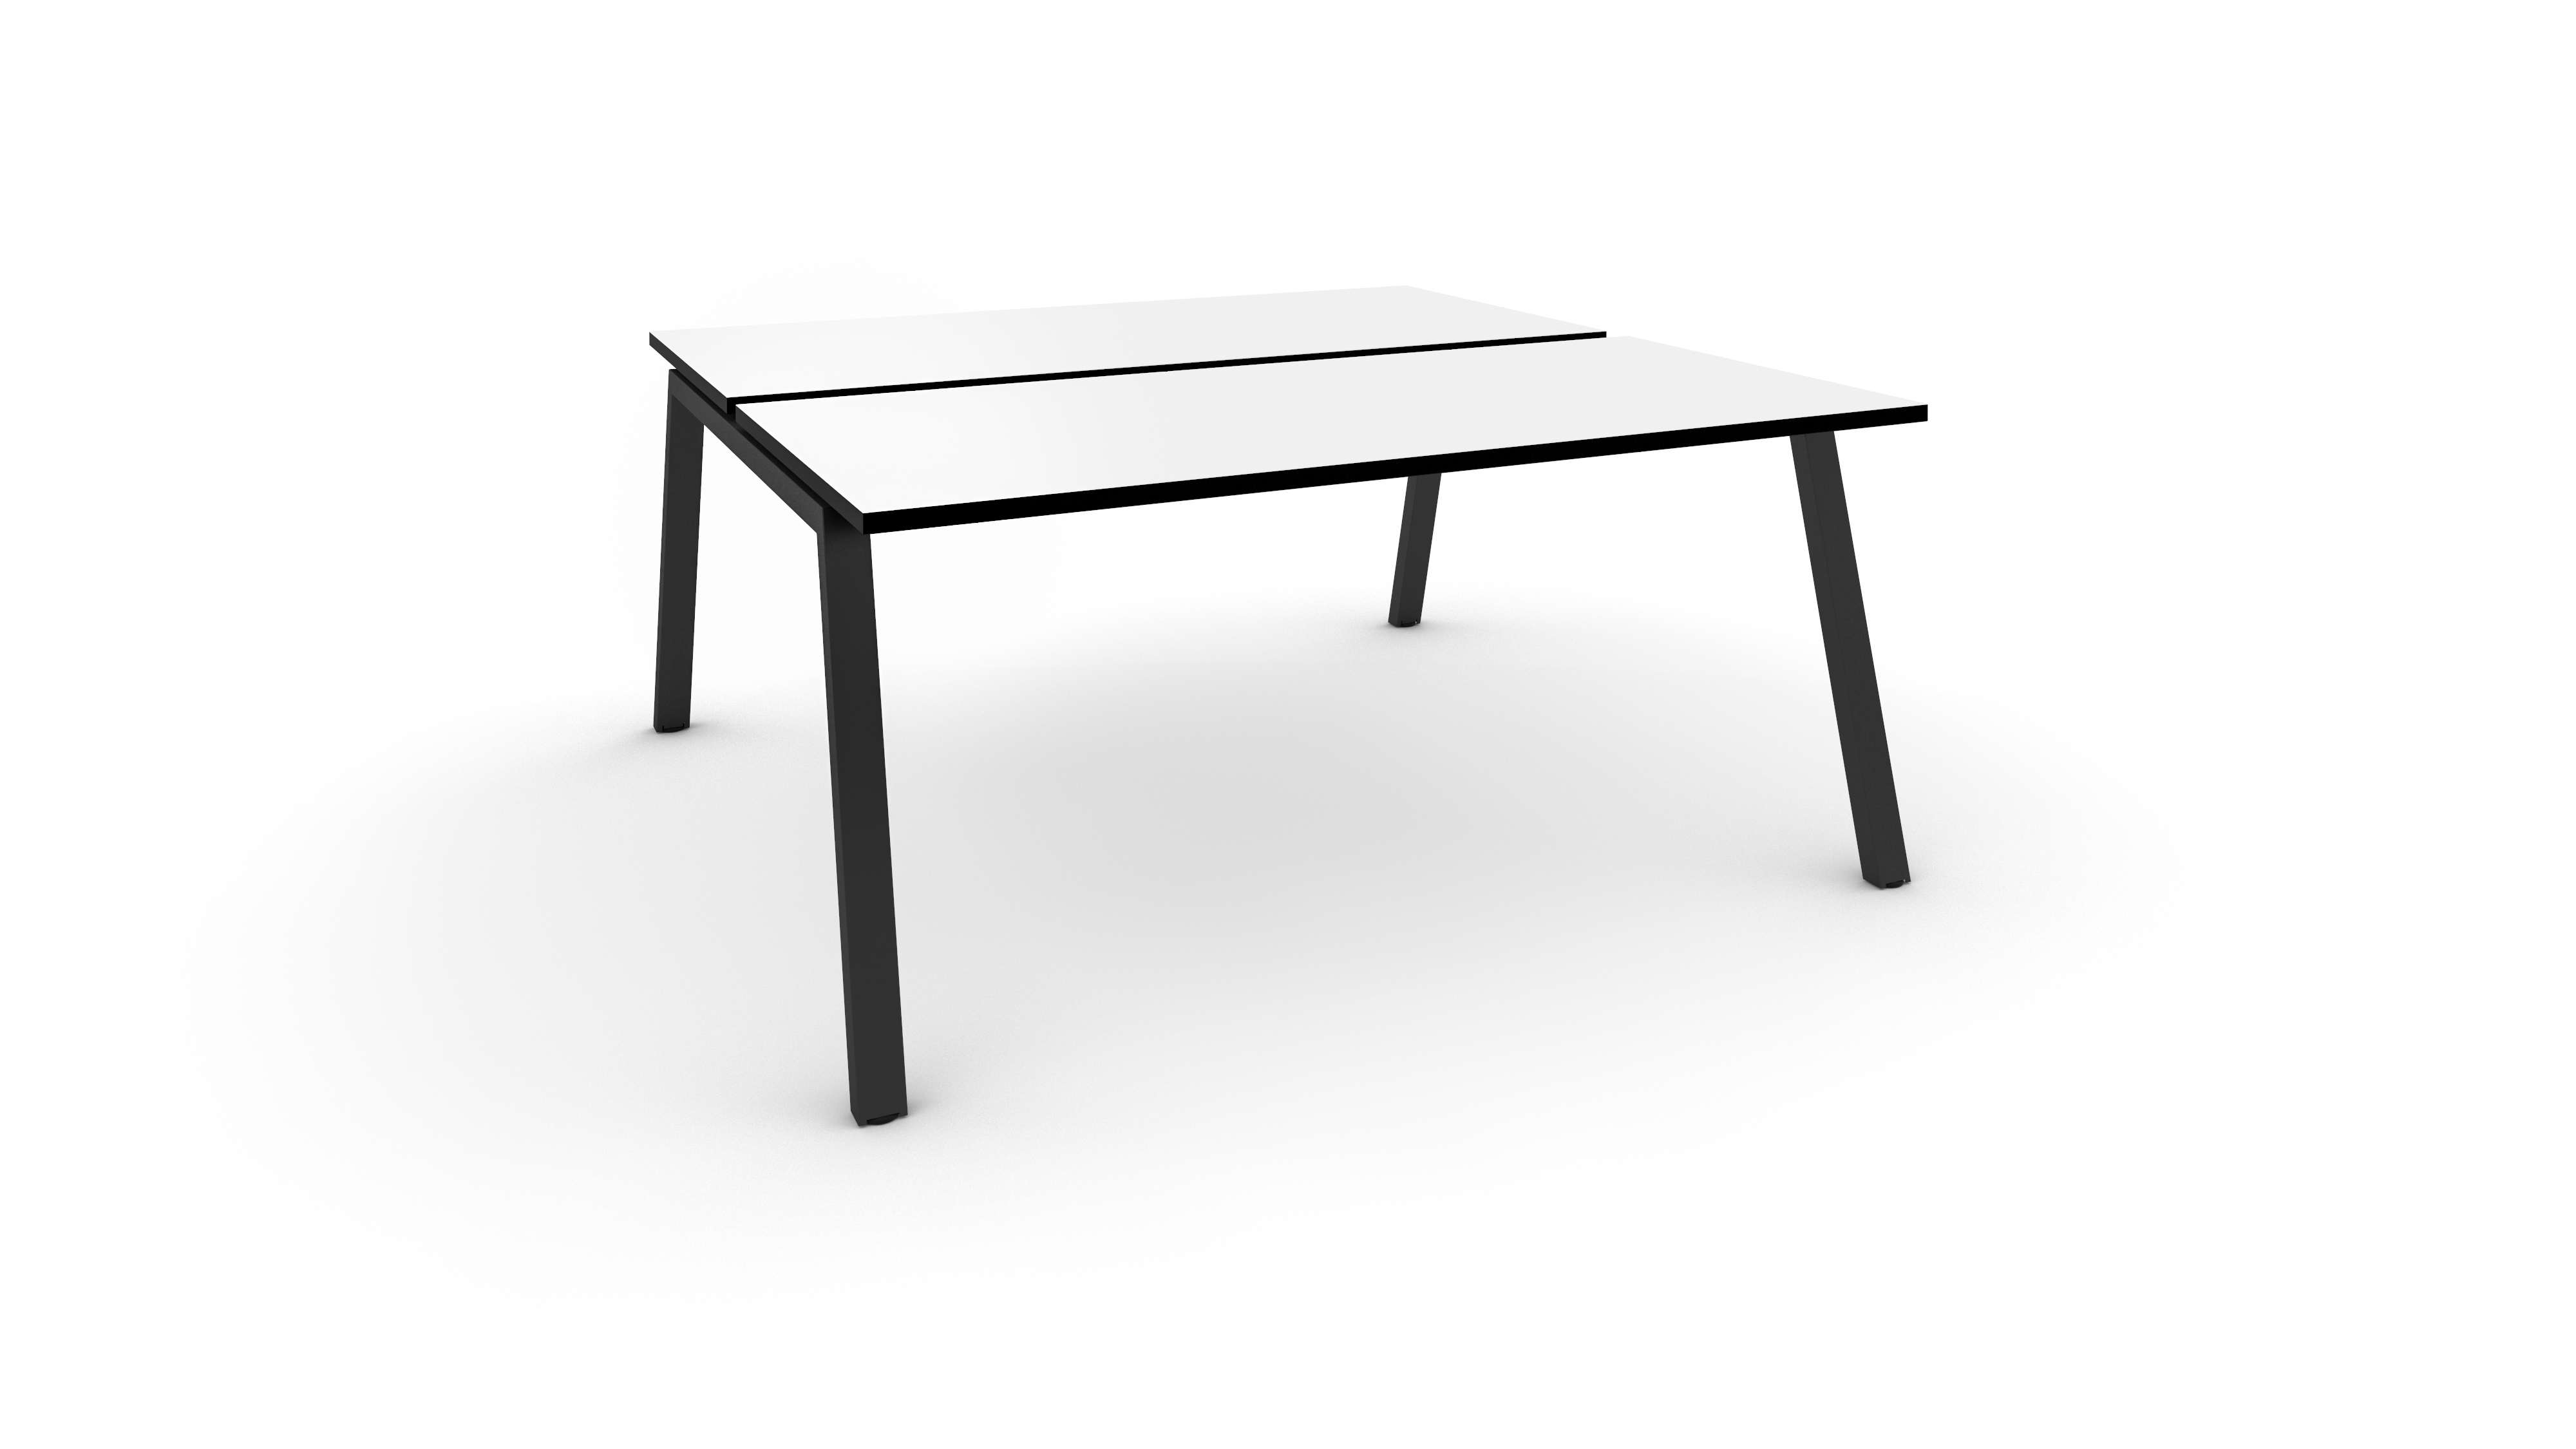 WS - A-frame desk - 2pers - Black frame, White top with black edge